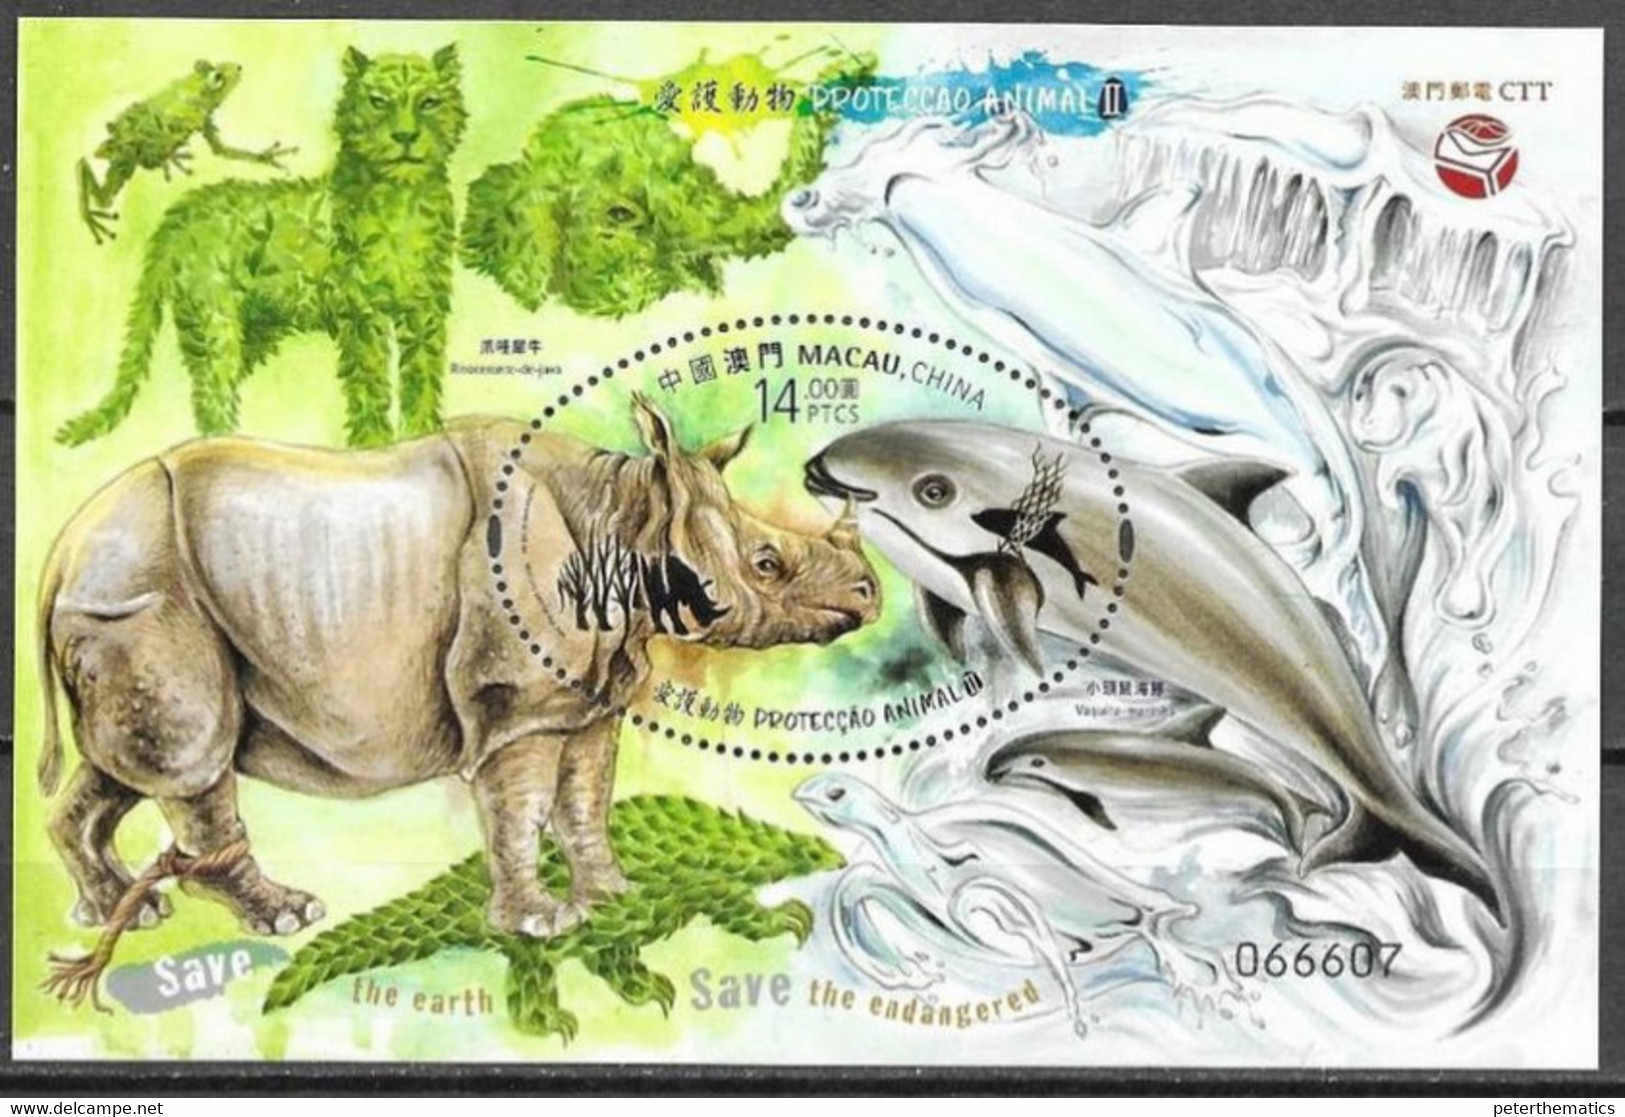 MACAO, 2020, MNH, ENDANGERED ANIMALS, DOLPHINS, TURTLES, FELINES, RHINOS, SHARKS, S/SHEET - Dauphins